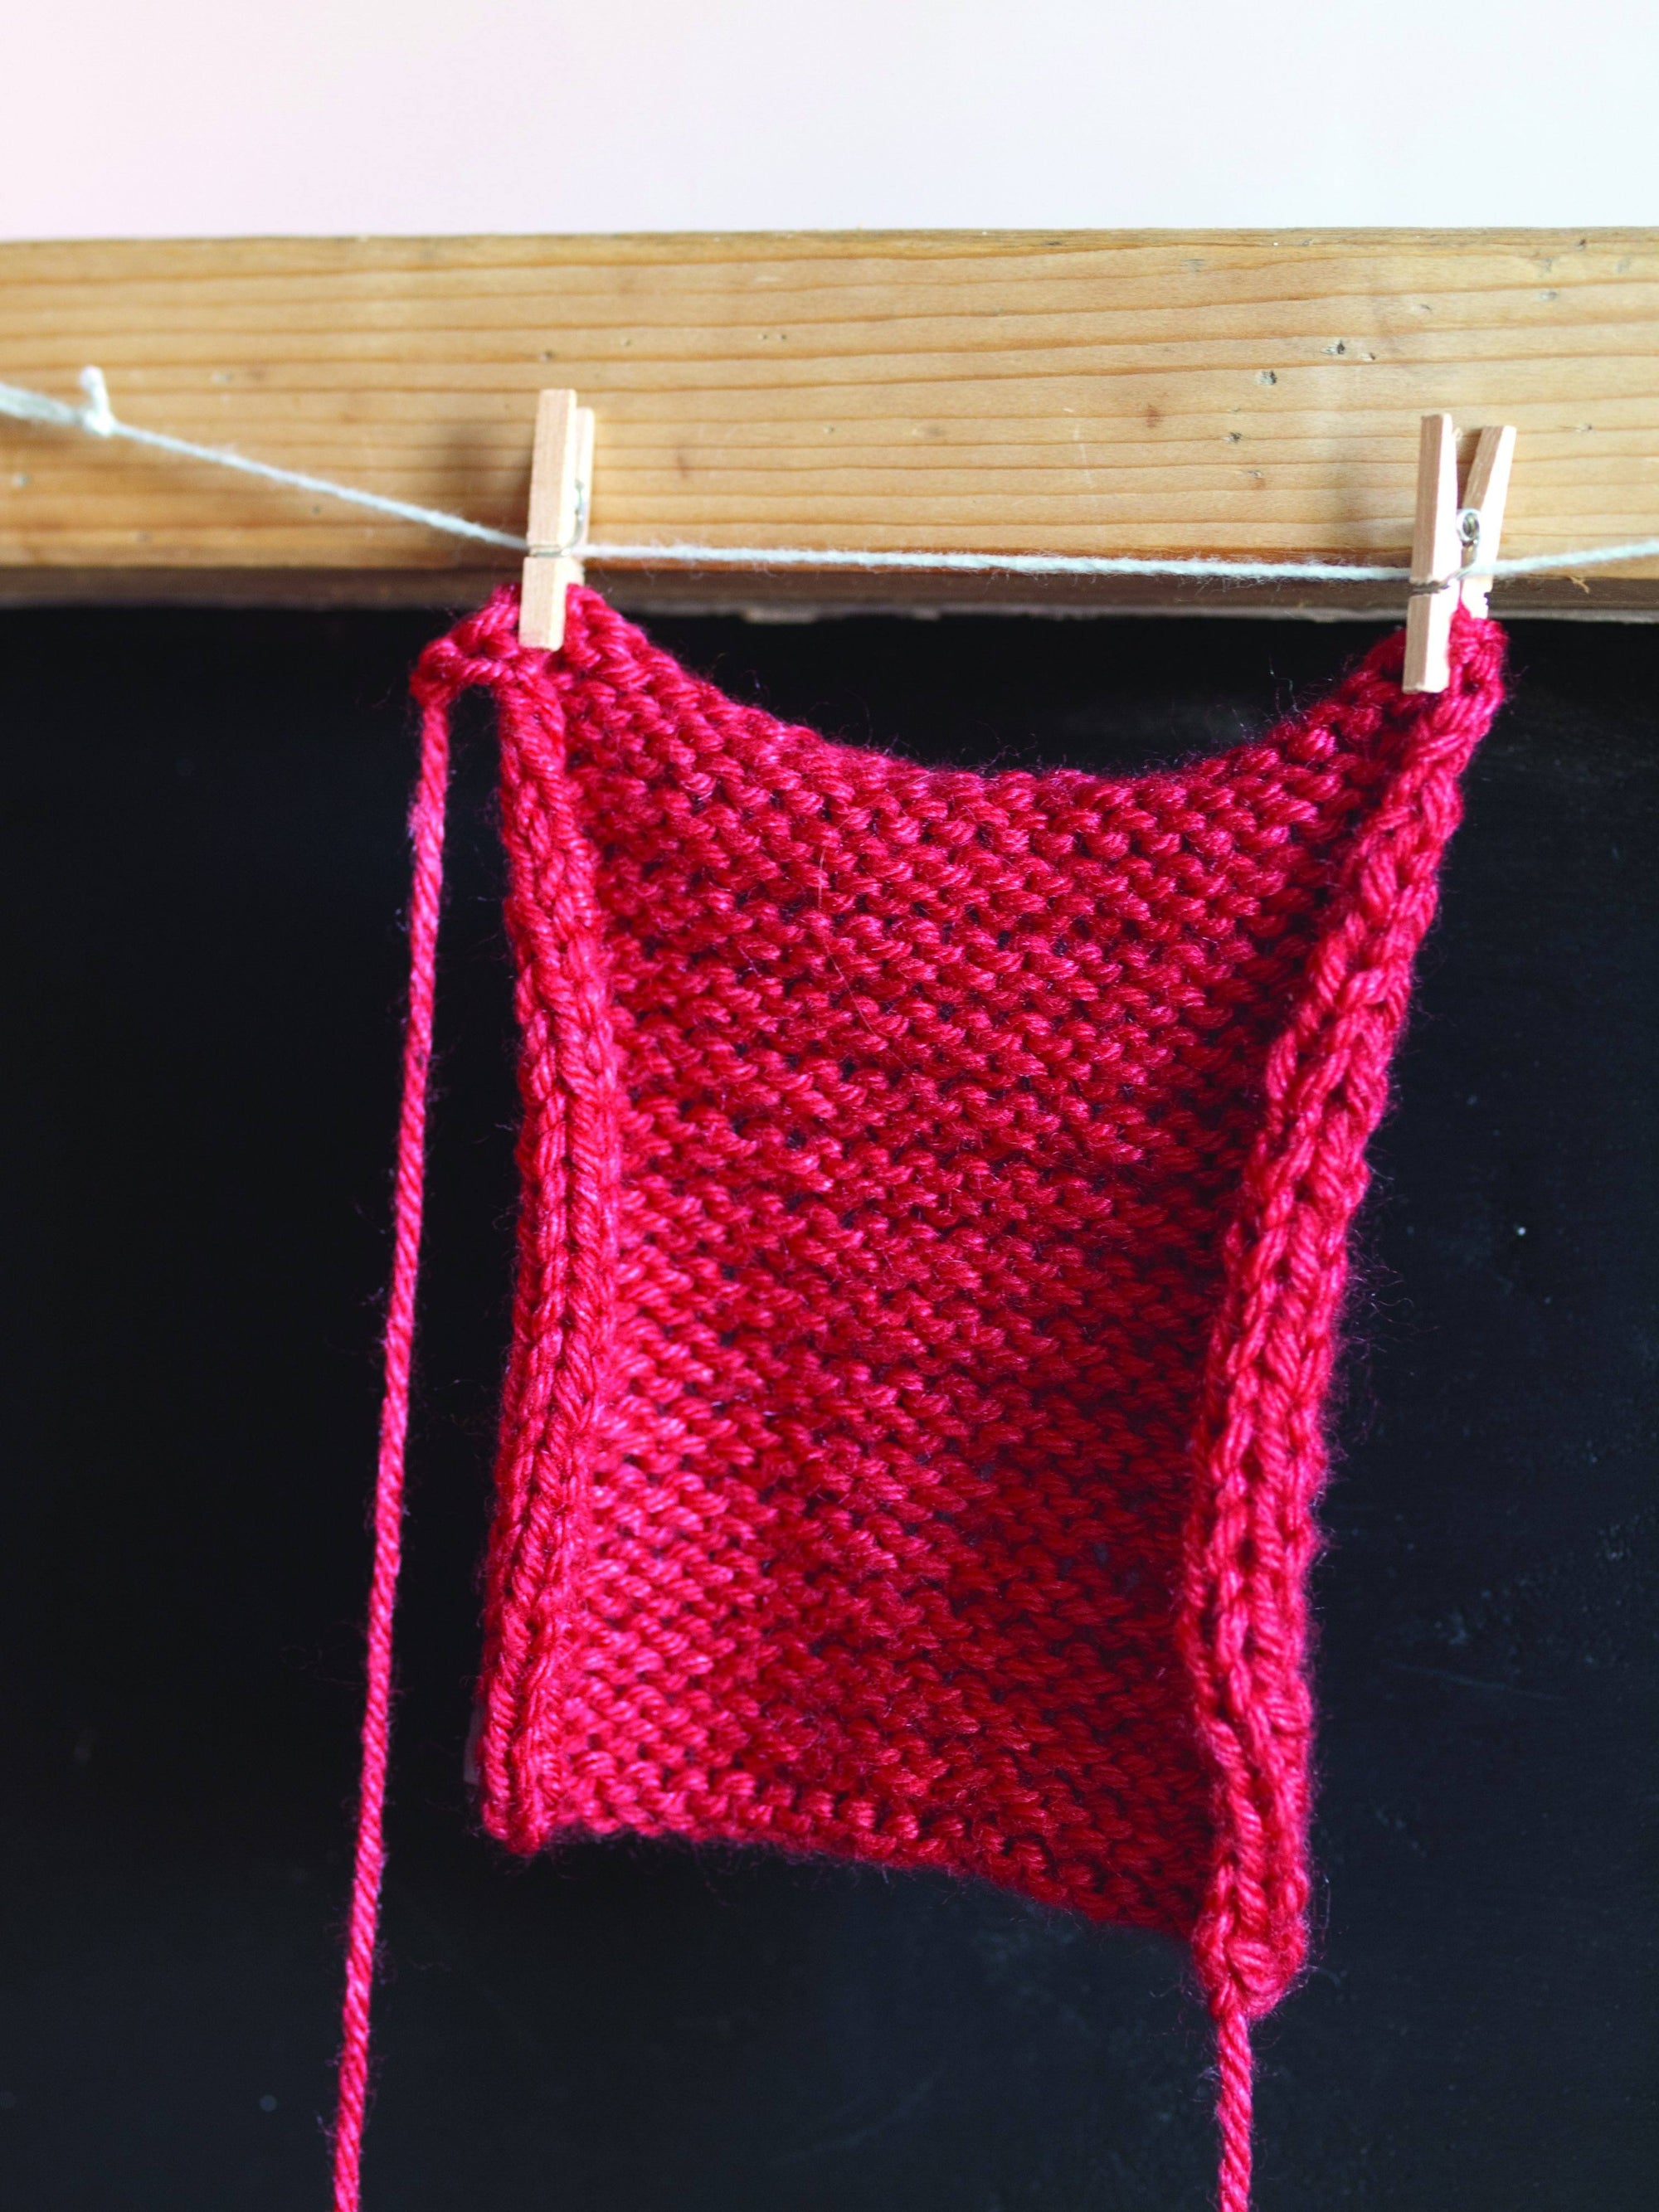 How to swatch for a sweater